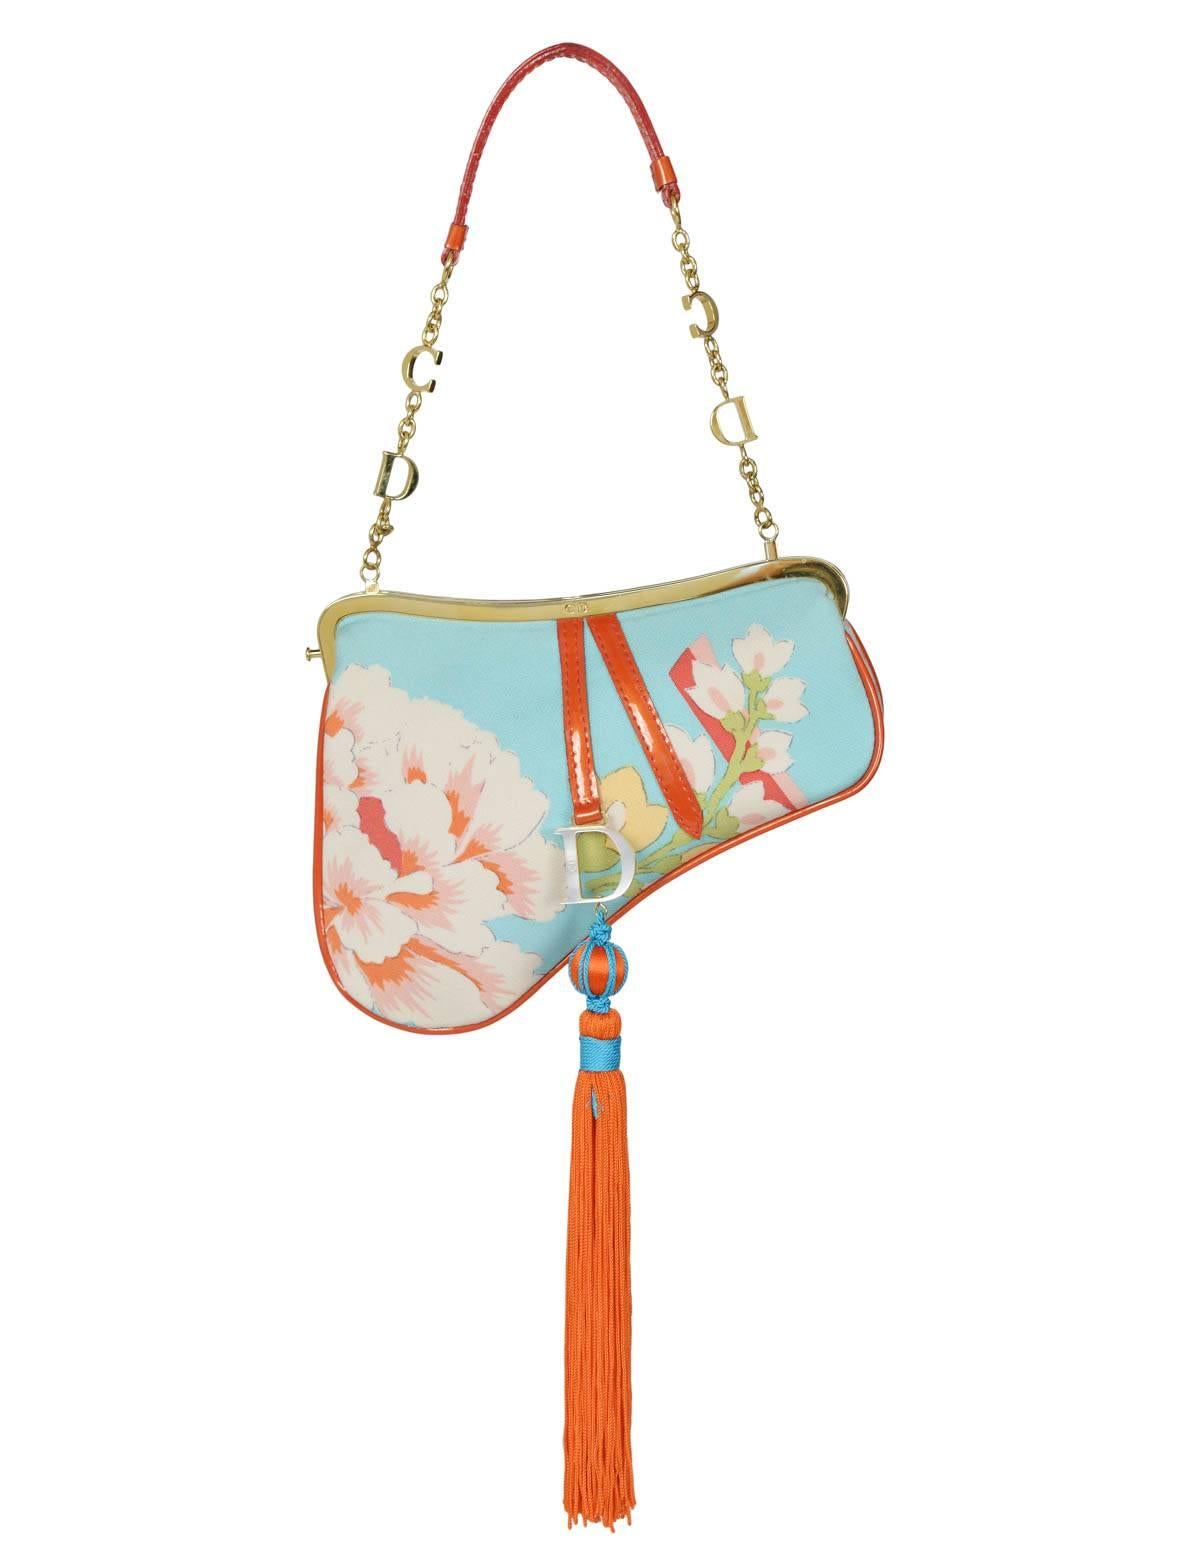 Christian Dior by John Galliano silk floral mini saddle evening bag with large red orange tassel, CD gold hardware and red trim. Dior print on backside. Collection AW 2003. 

